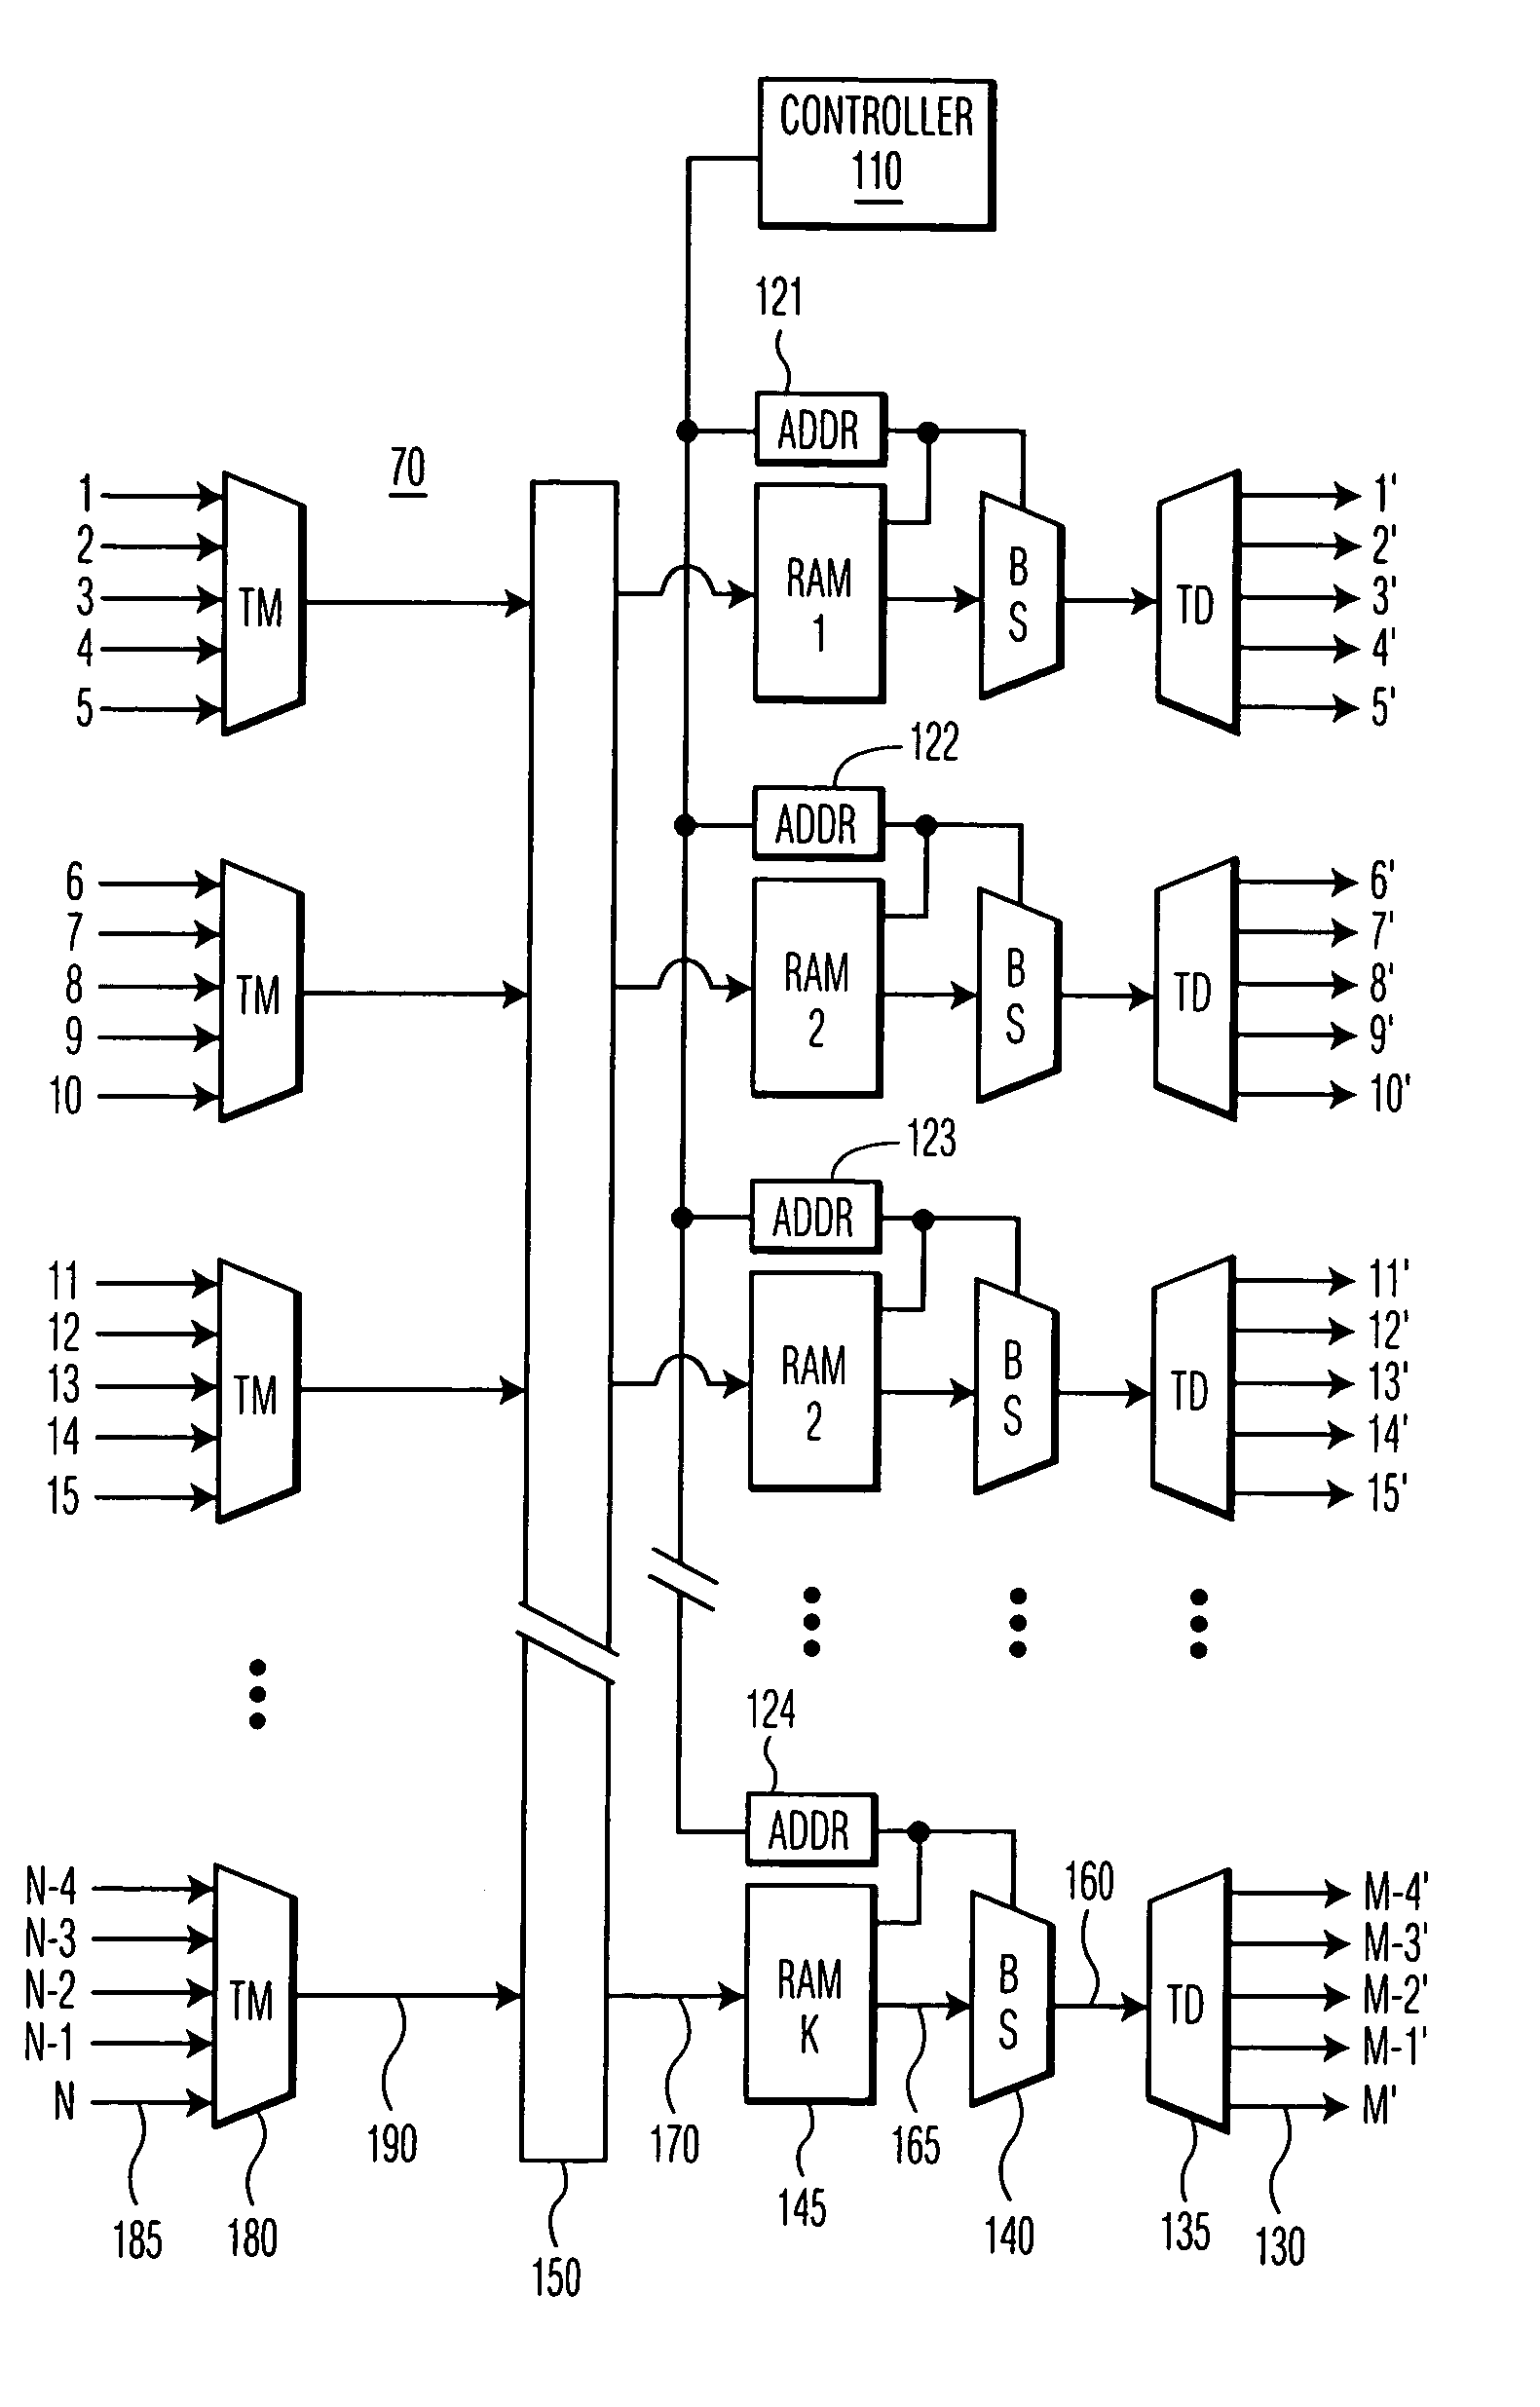 Technique for creating a machine to route non-packetized digital signals using distributed RAM